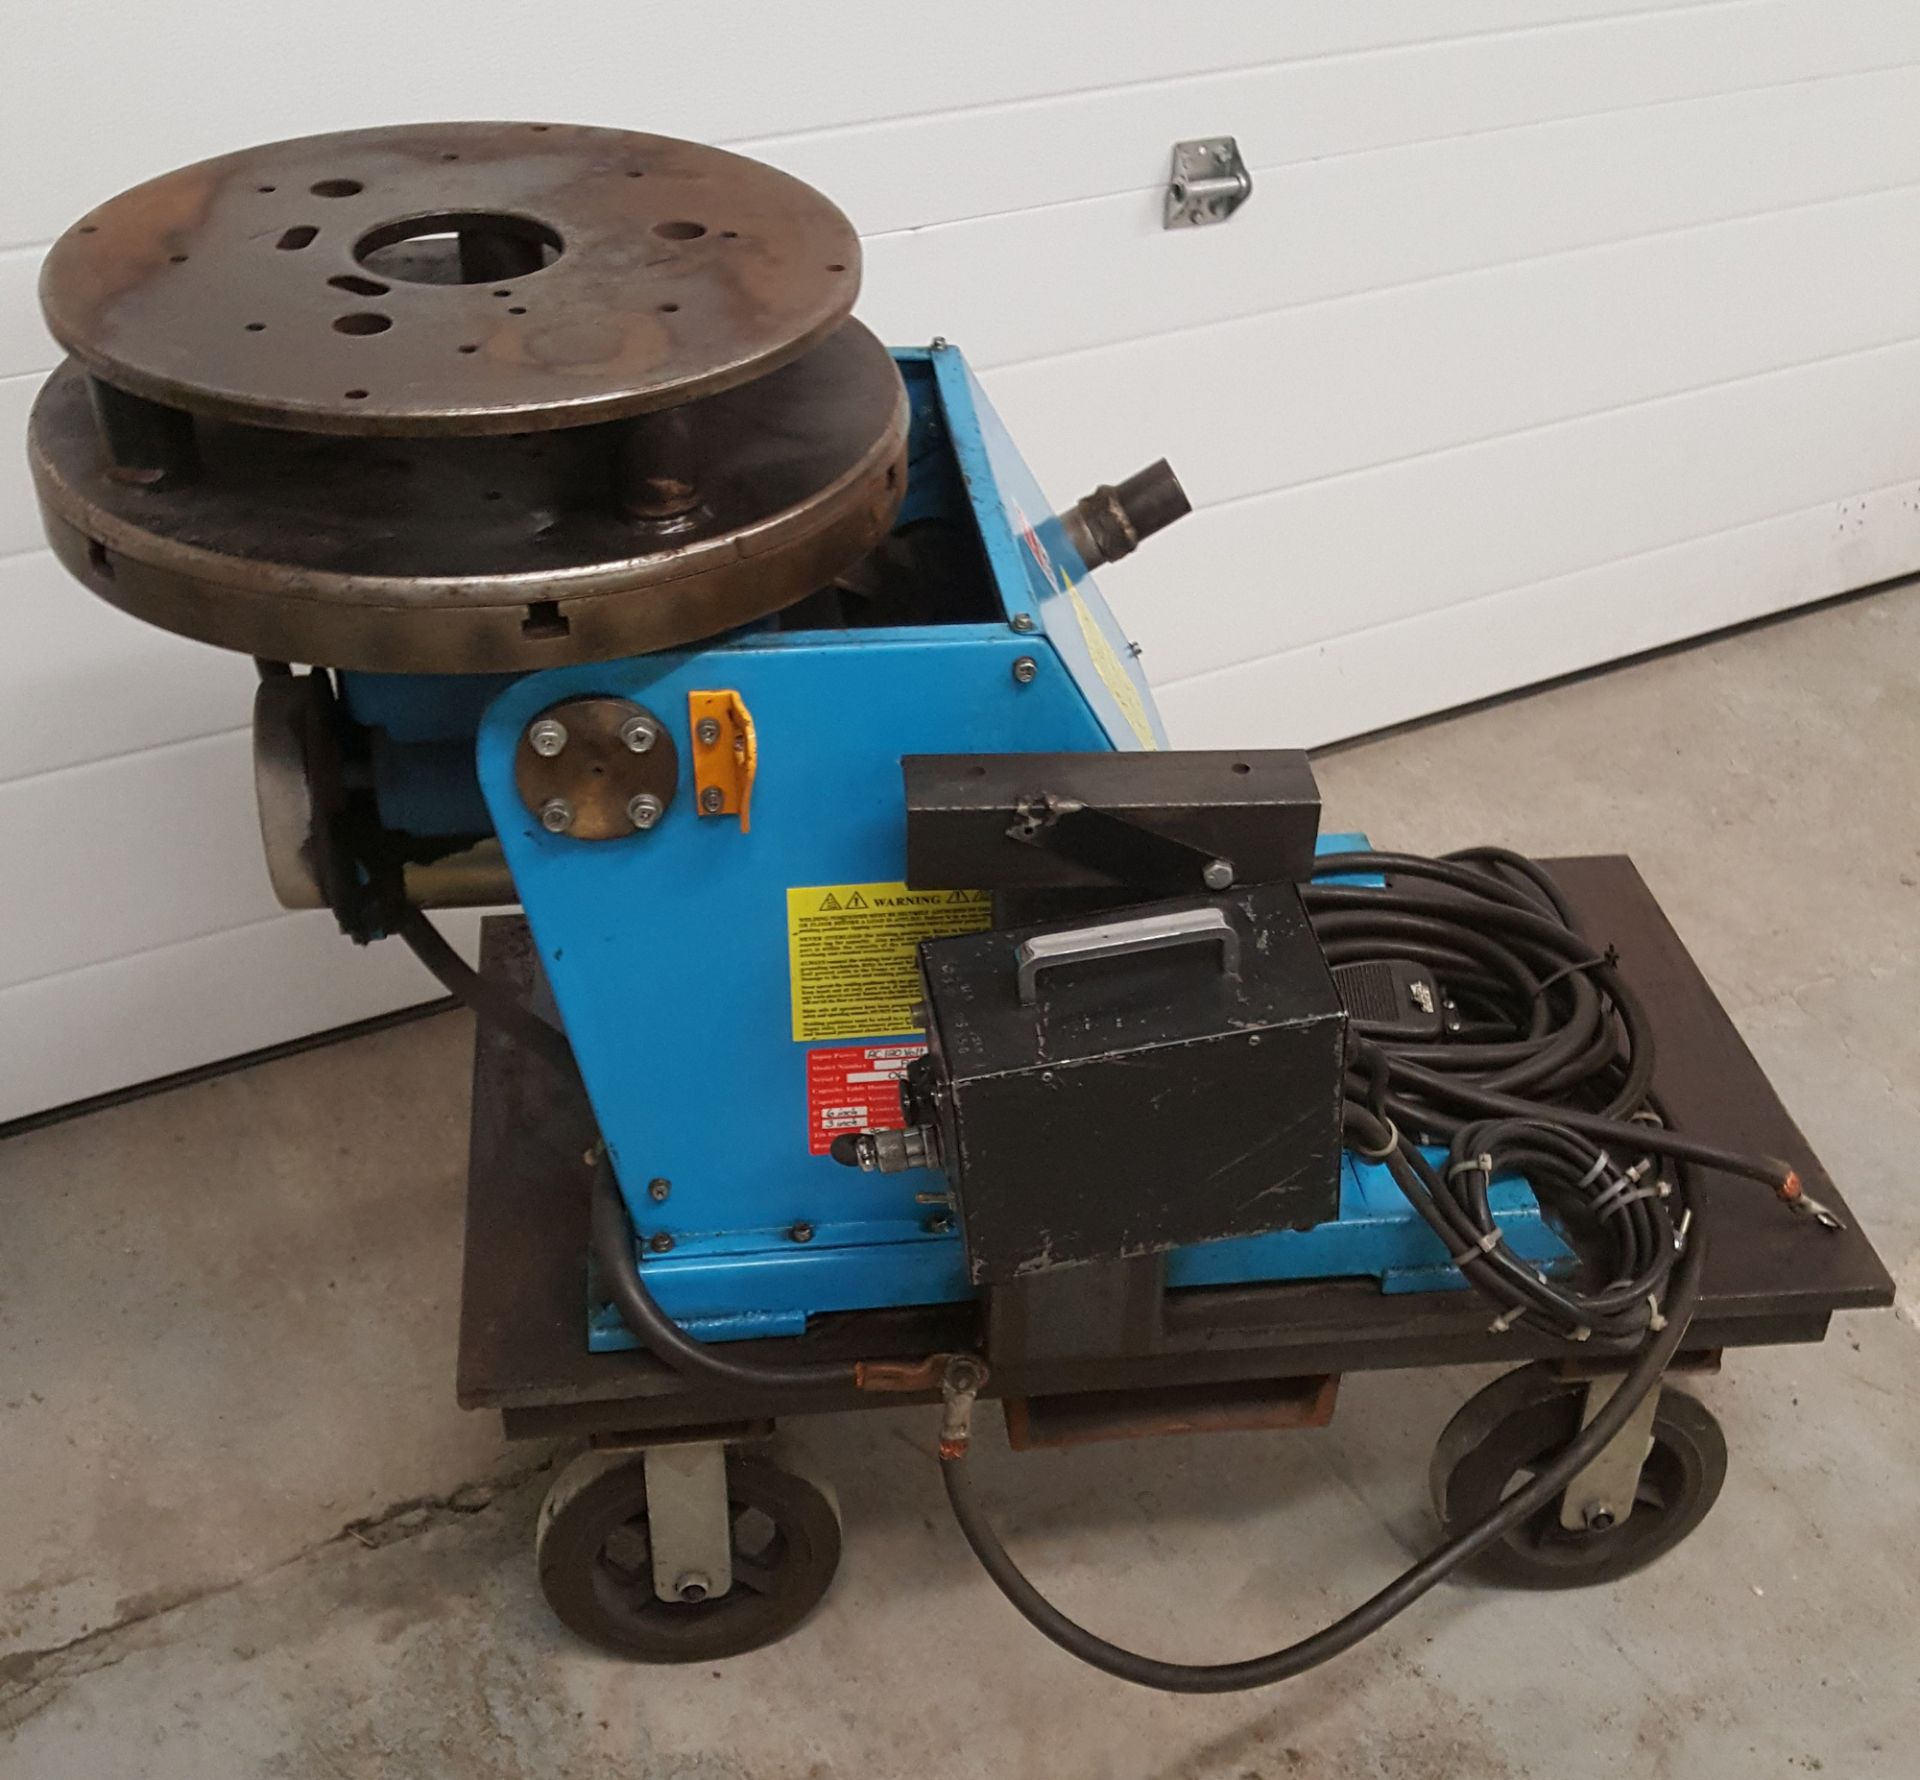 ALL-FAB CORP 17" ROTARY TURN TABLE WELDING POSITIONER WITH 500LBS. CAPACITY S/N: N/A - Image 3 of 6